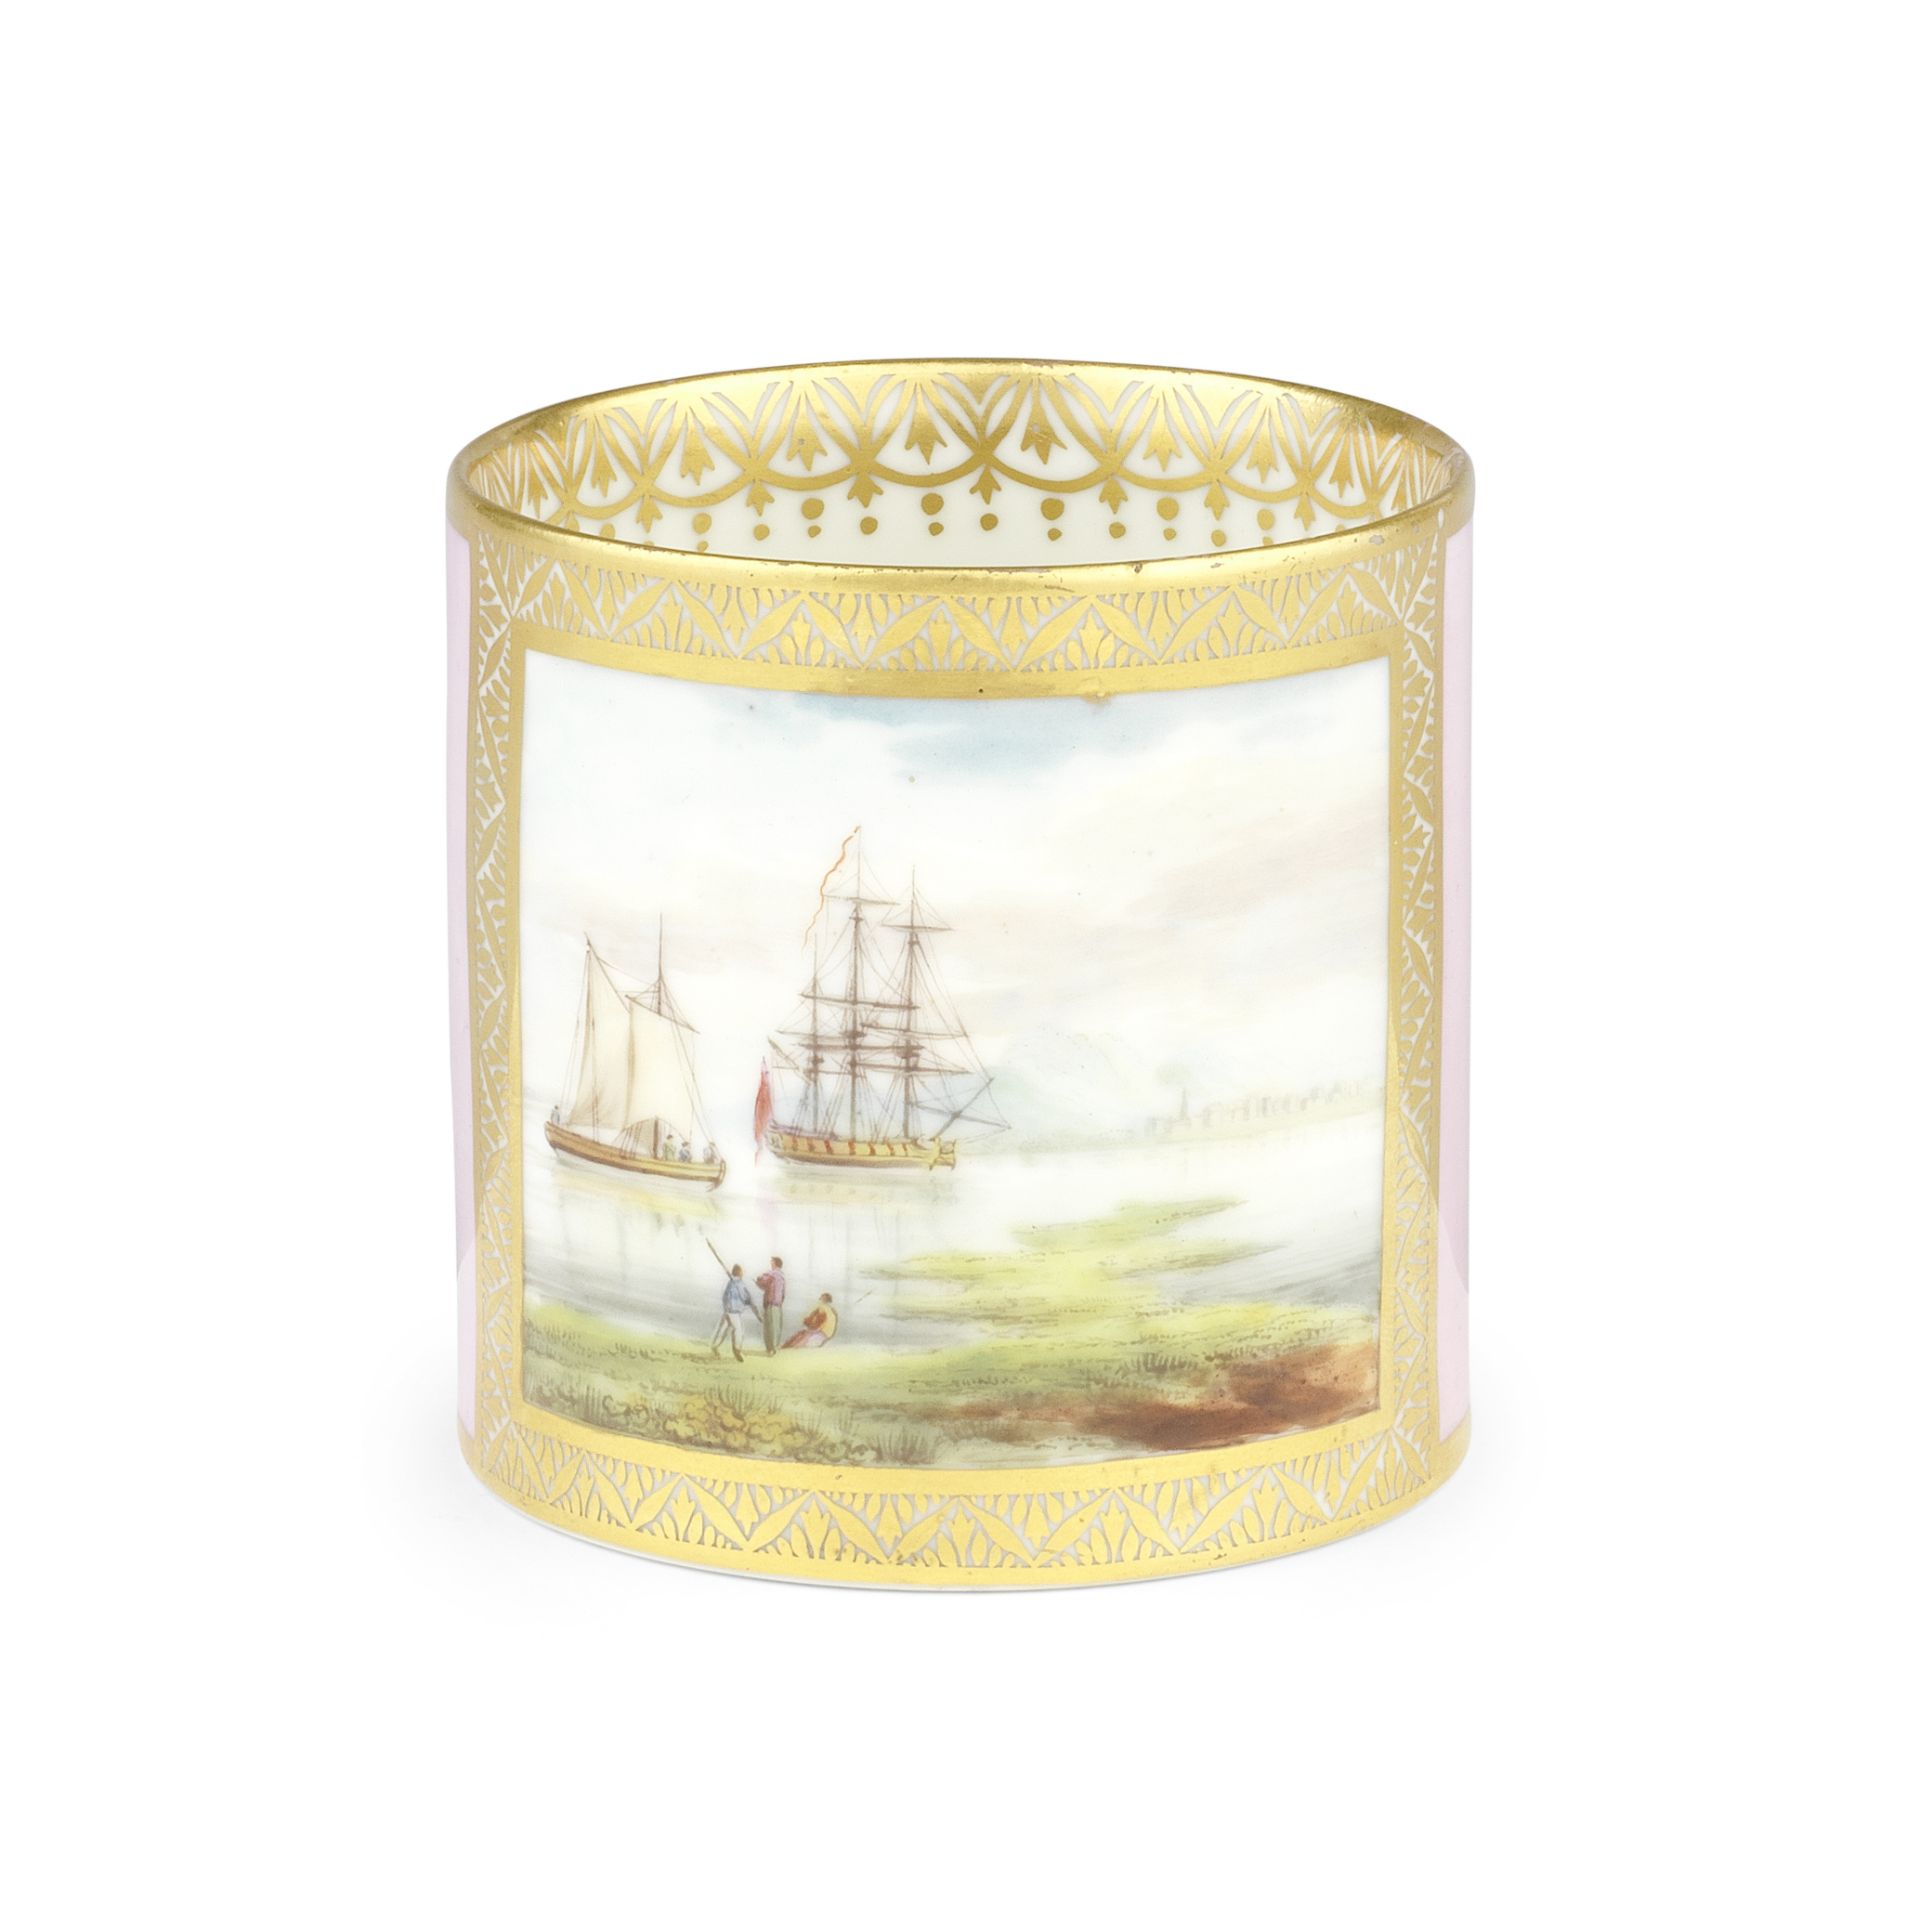 A large Derby coffee can by George Robertson, circa 1797-1800